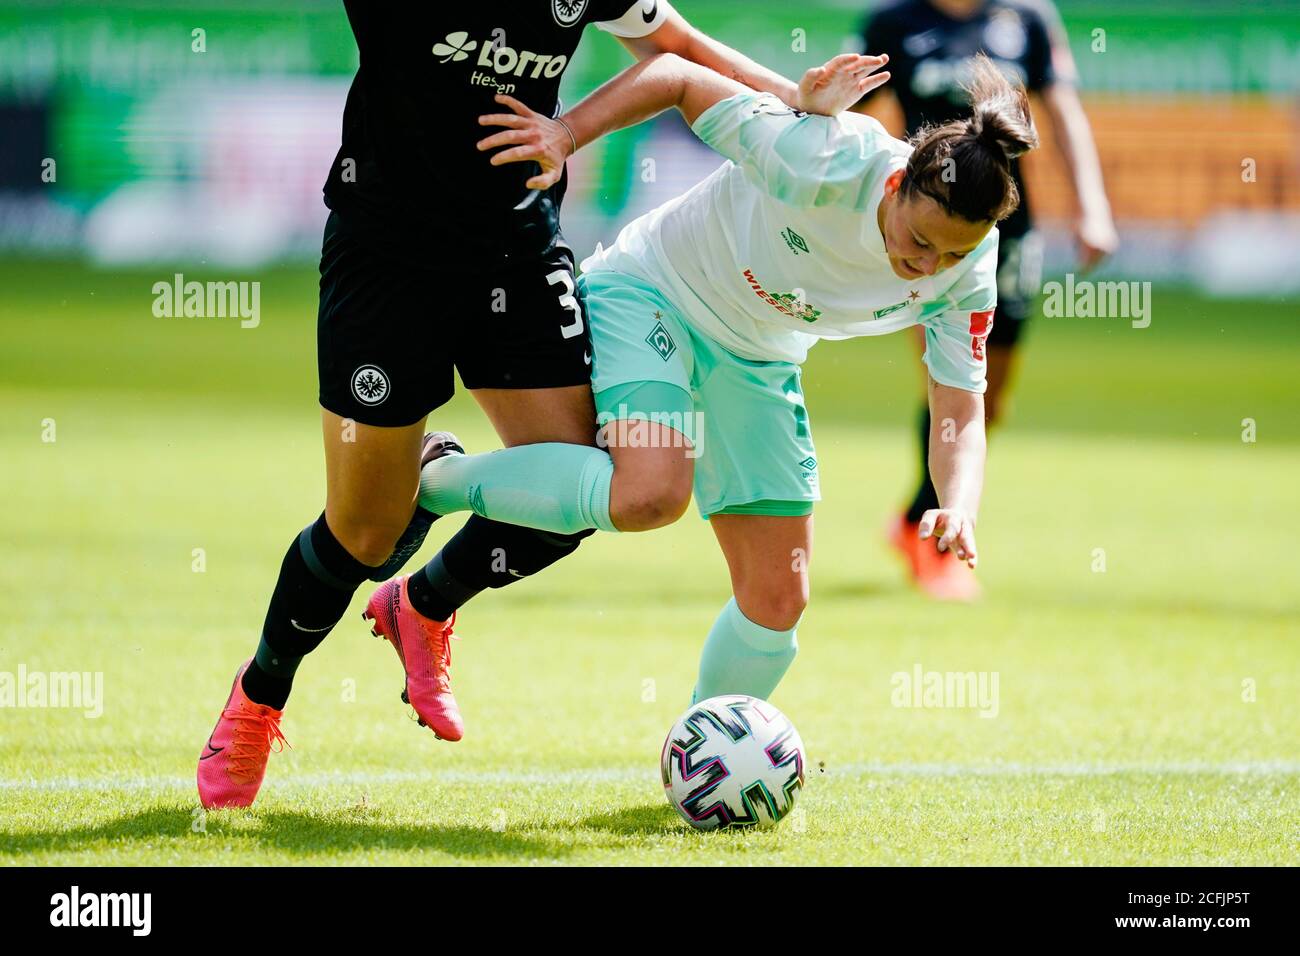 06 September 2020, Hessen, Frankfurt/Main: Football, women: Bundesliga, Eintracht Frankfurt - SV Werder Bremen, Matchday 1, Deutsche Bank Park. Frankfurt's Tanja Pawollek (l) and Bremen's Jasmin Sehan fight for the ball. Photo: Uwe Anspach/dpa - IMPORTANT NOTE: In accordance with the regulations of the DFL Deutsche Fußball Liga and the DFB Deutscher Fußball-Bund, it is prohibited to exploit or have exploited in the stadium and/or from the game taken photographs in the form of sequence images and/or video-like photo series. Stock Photo